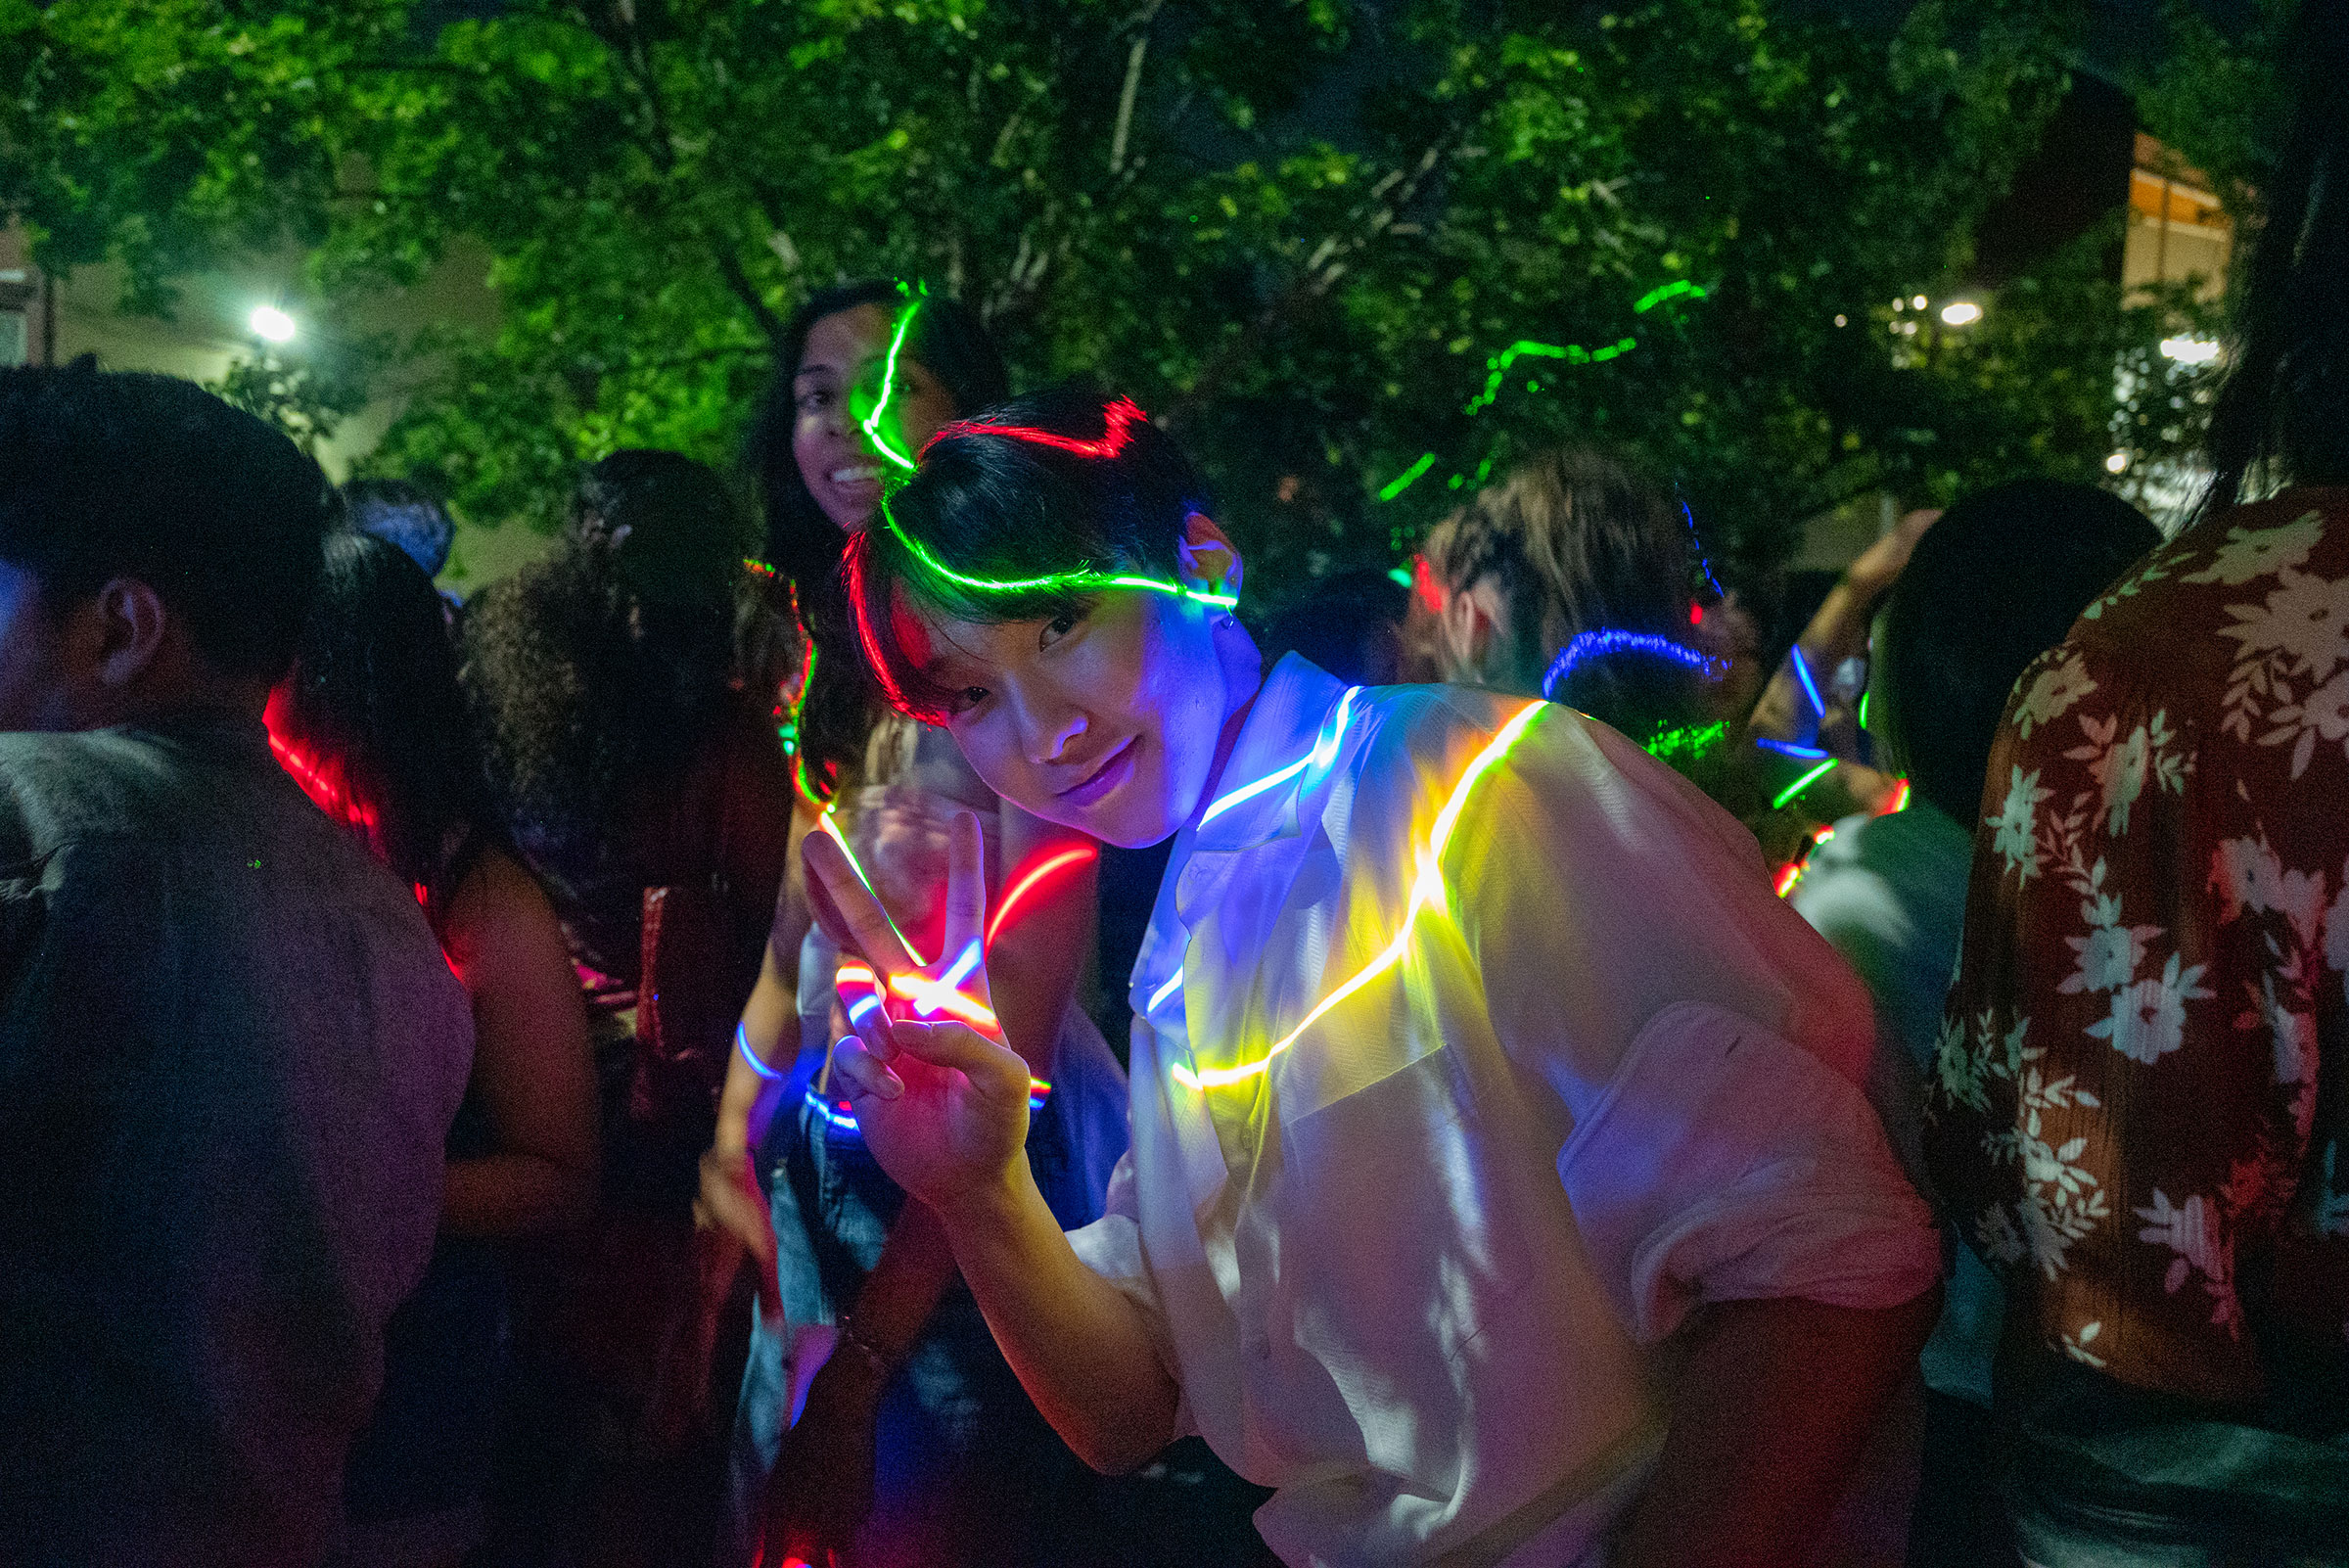 a college student giving the peace sign at the camera while glowing lights glow around him.  They're out on campus, it's dark, and they're in a crowd of other students